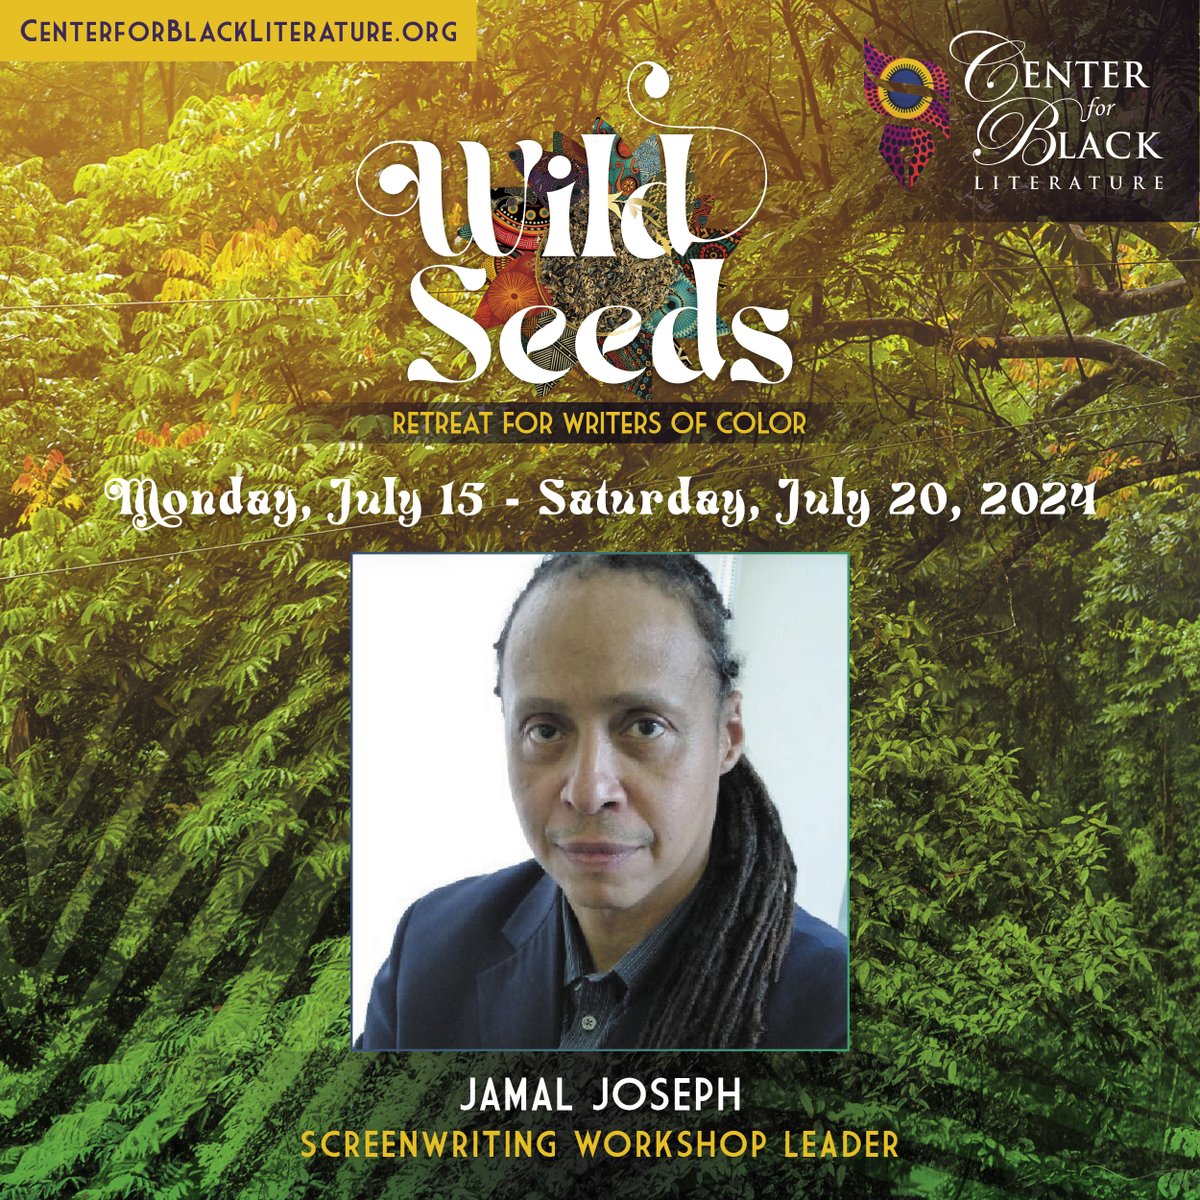 We are excited to welcome #JamalJoseph as the #Screenwriting Workshop Leader for the Summer 2024 #WildSeedsRetreatForWritersOfColor. The submission deadline is Friday, May 17, 2024. #CenterforBlackLiterature #BlackWritersMatter